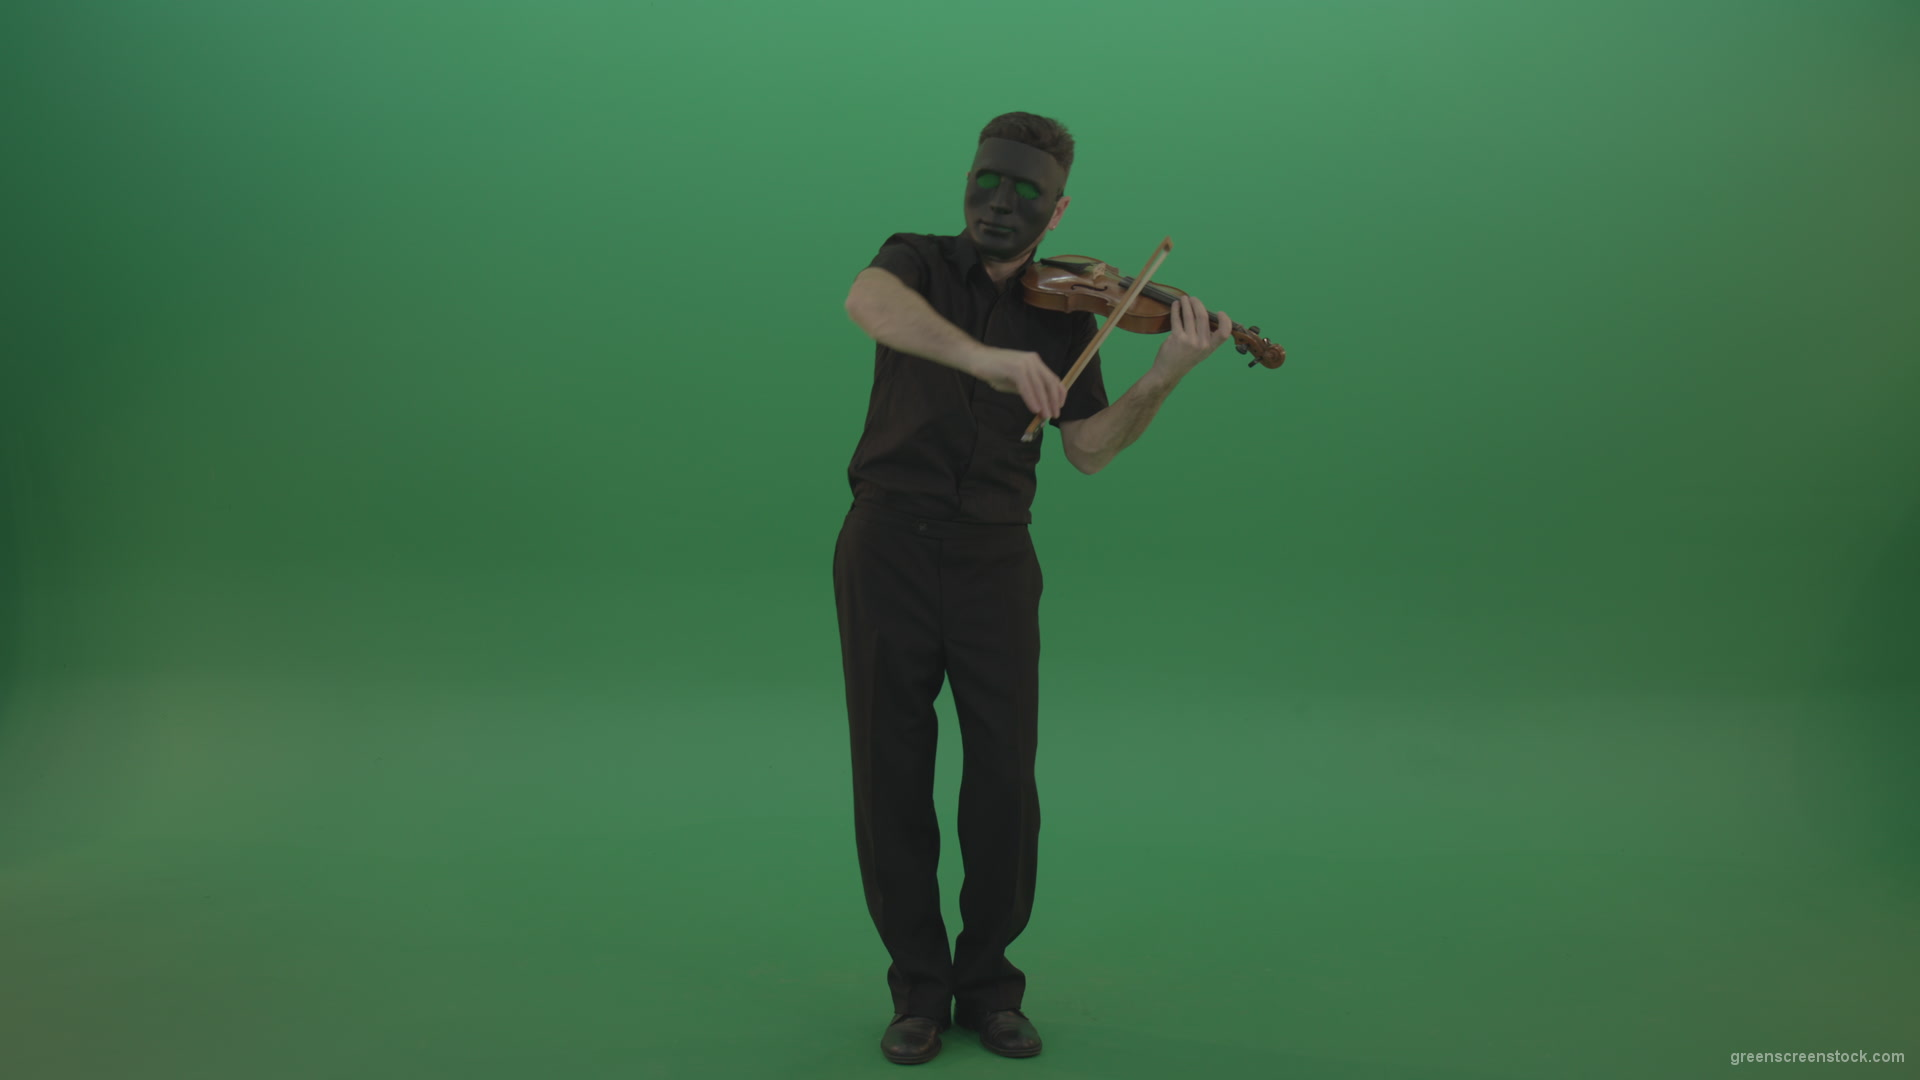 Full-height-Rock-Man-in-black-wear-and-mask-play-violin-fiddle-strings-gothic-dark-music-isolated-on-green-screen_009 Green Screen Stock